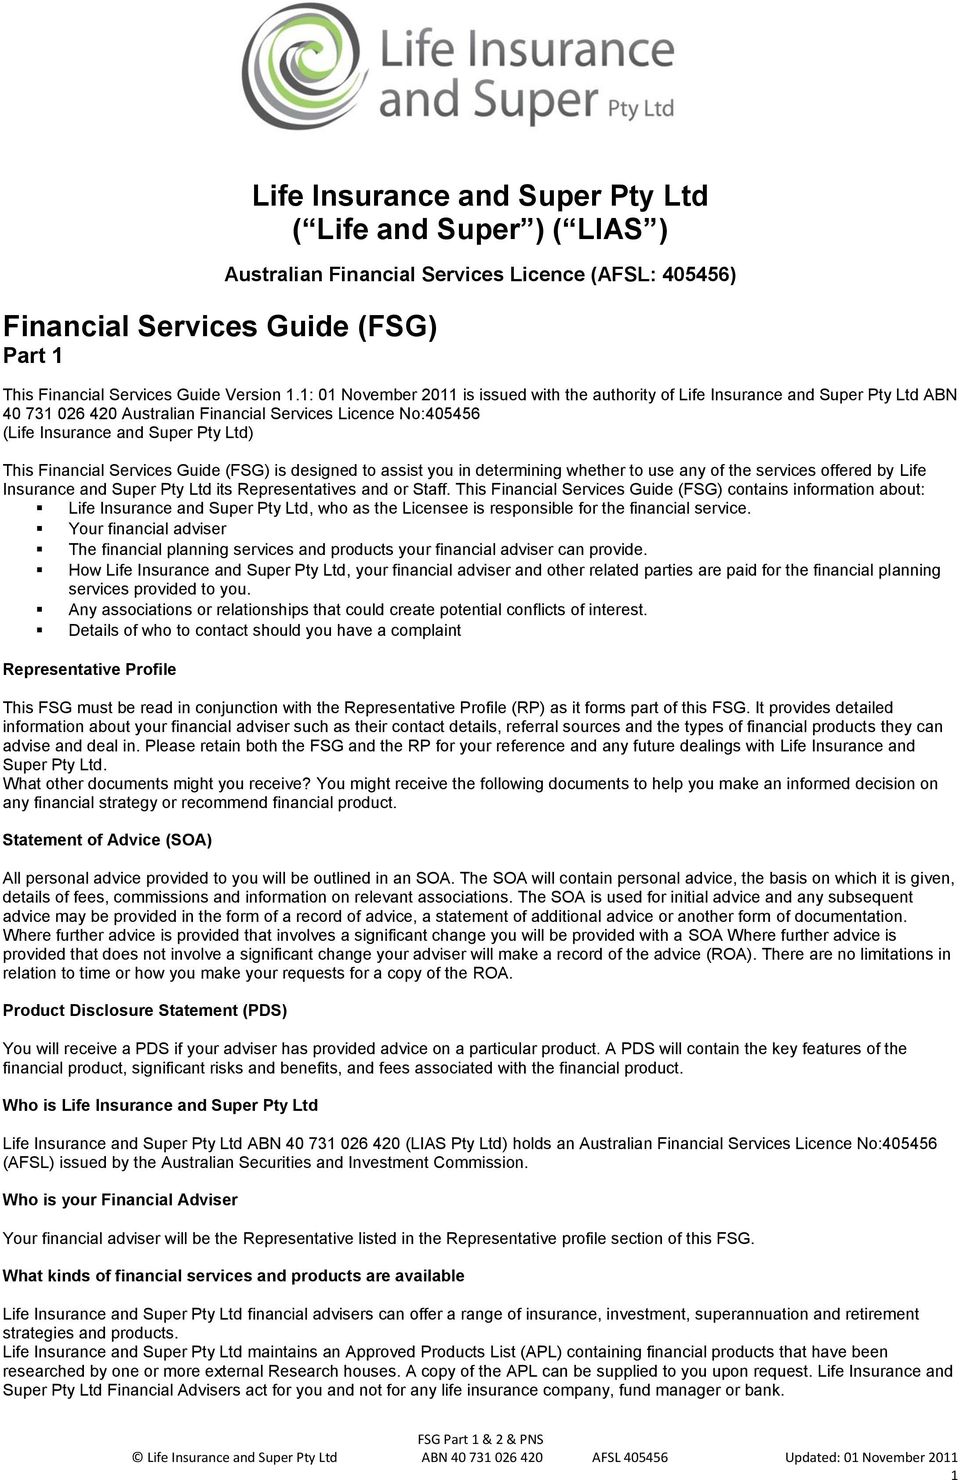 Financial Services Guide (FSG) is designed to assist you in determining whether to use any of the services offered by Life Insurance and Super Pty Ltd its Representatives and or Staff.